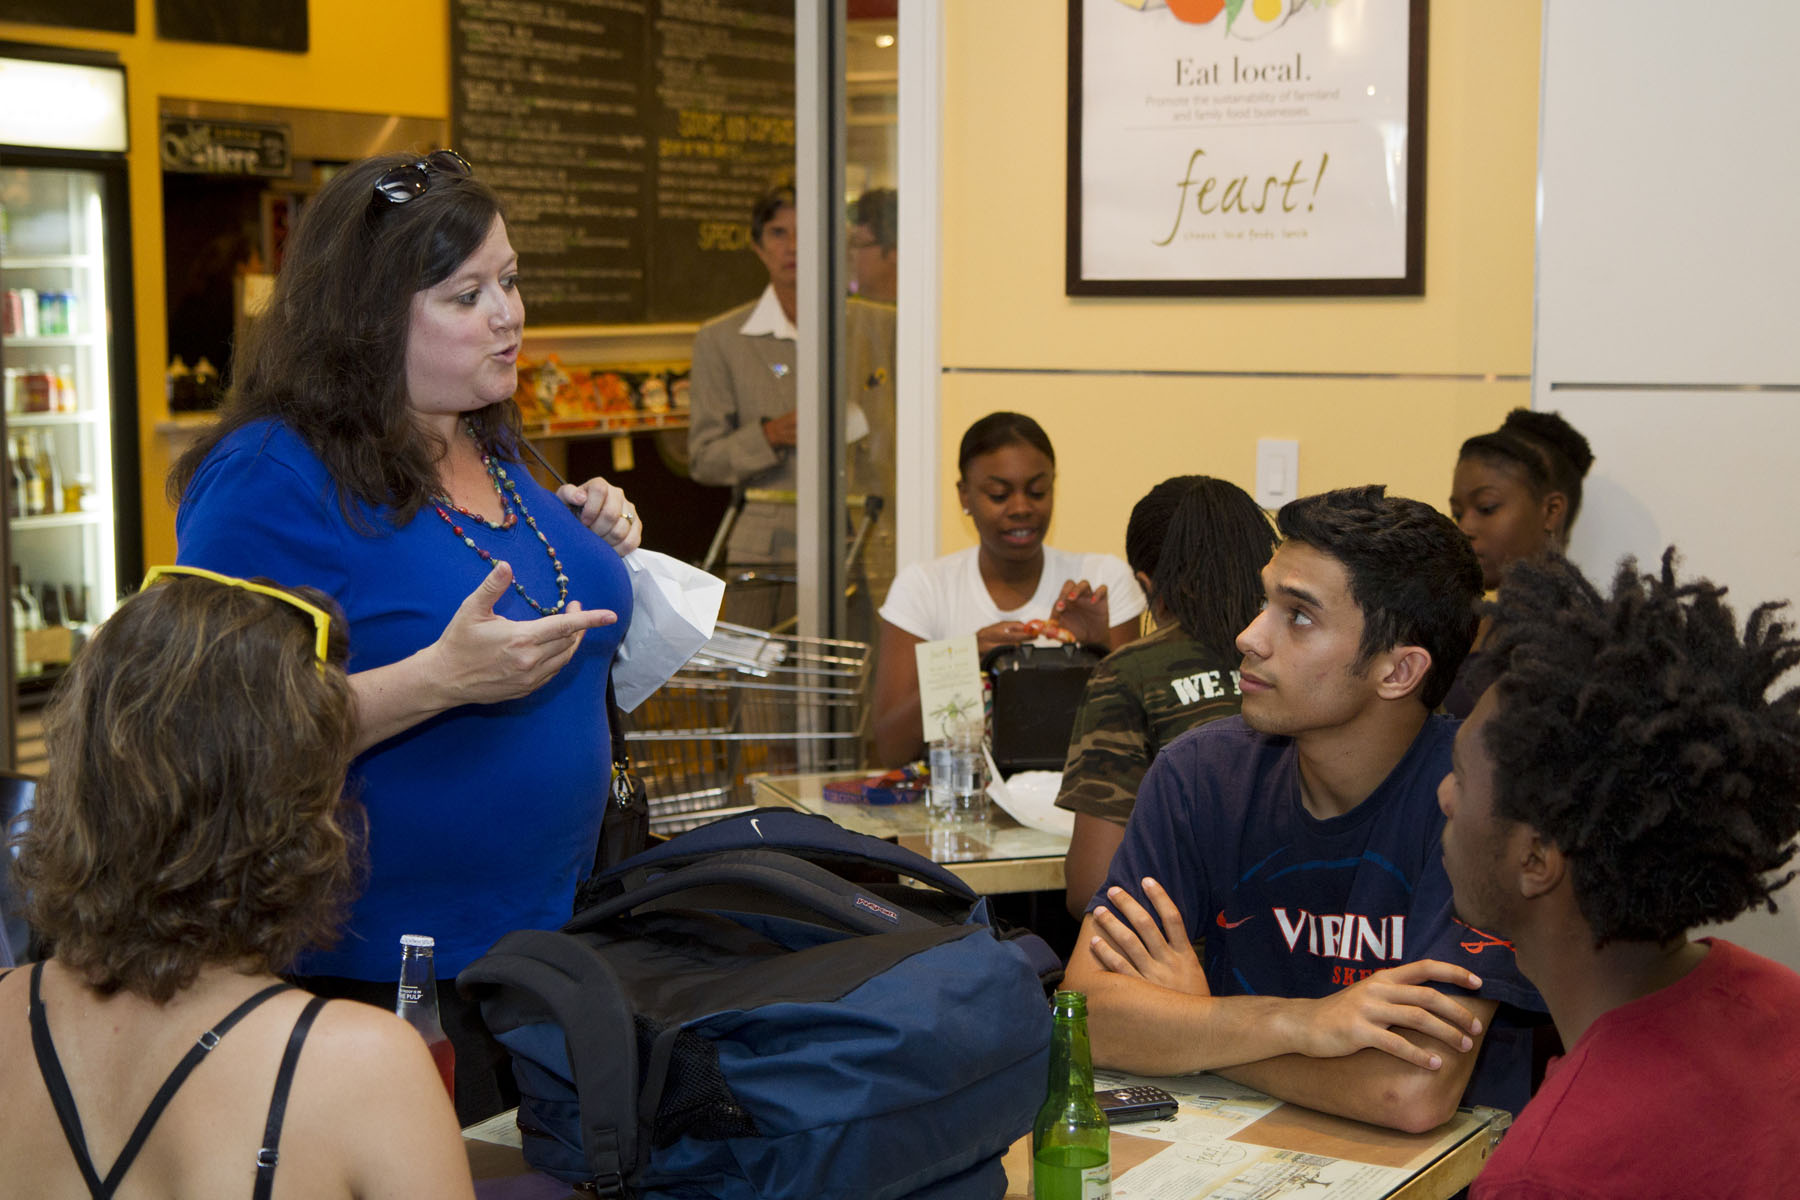 Lisa Shutt talks to her Anthropology students in a diner